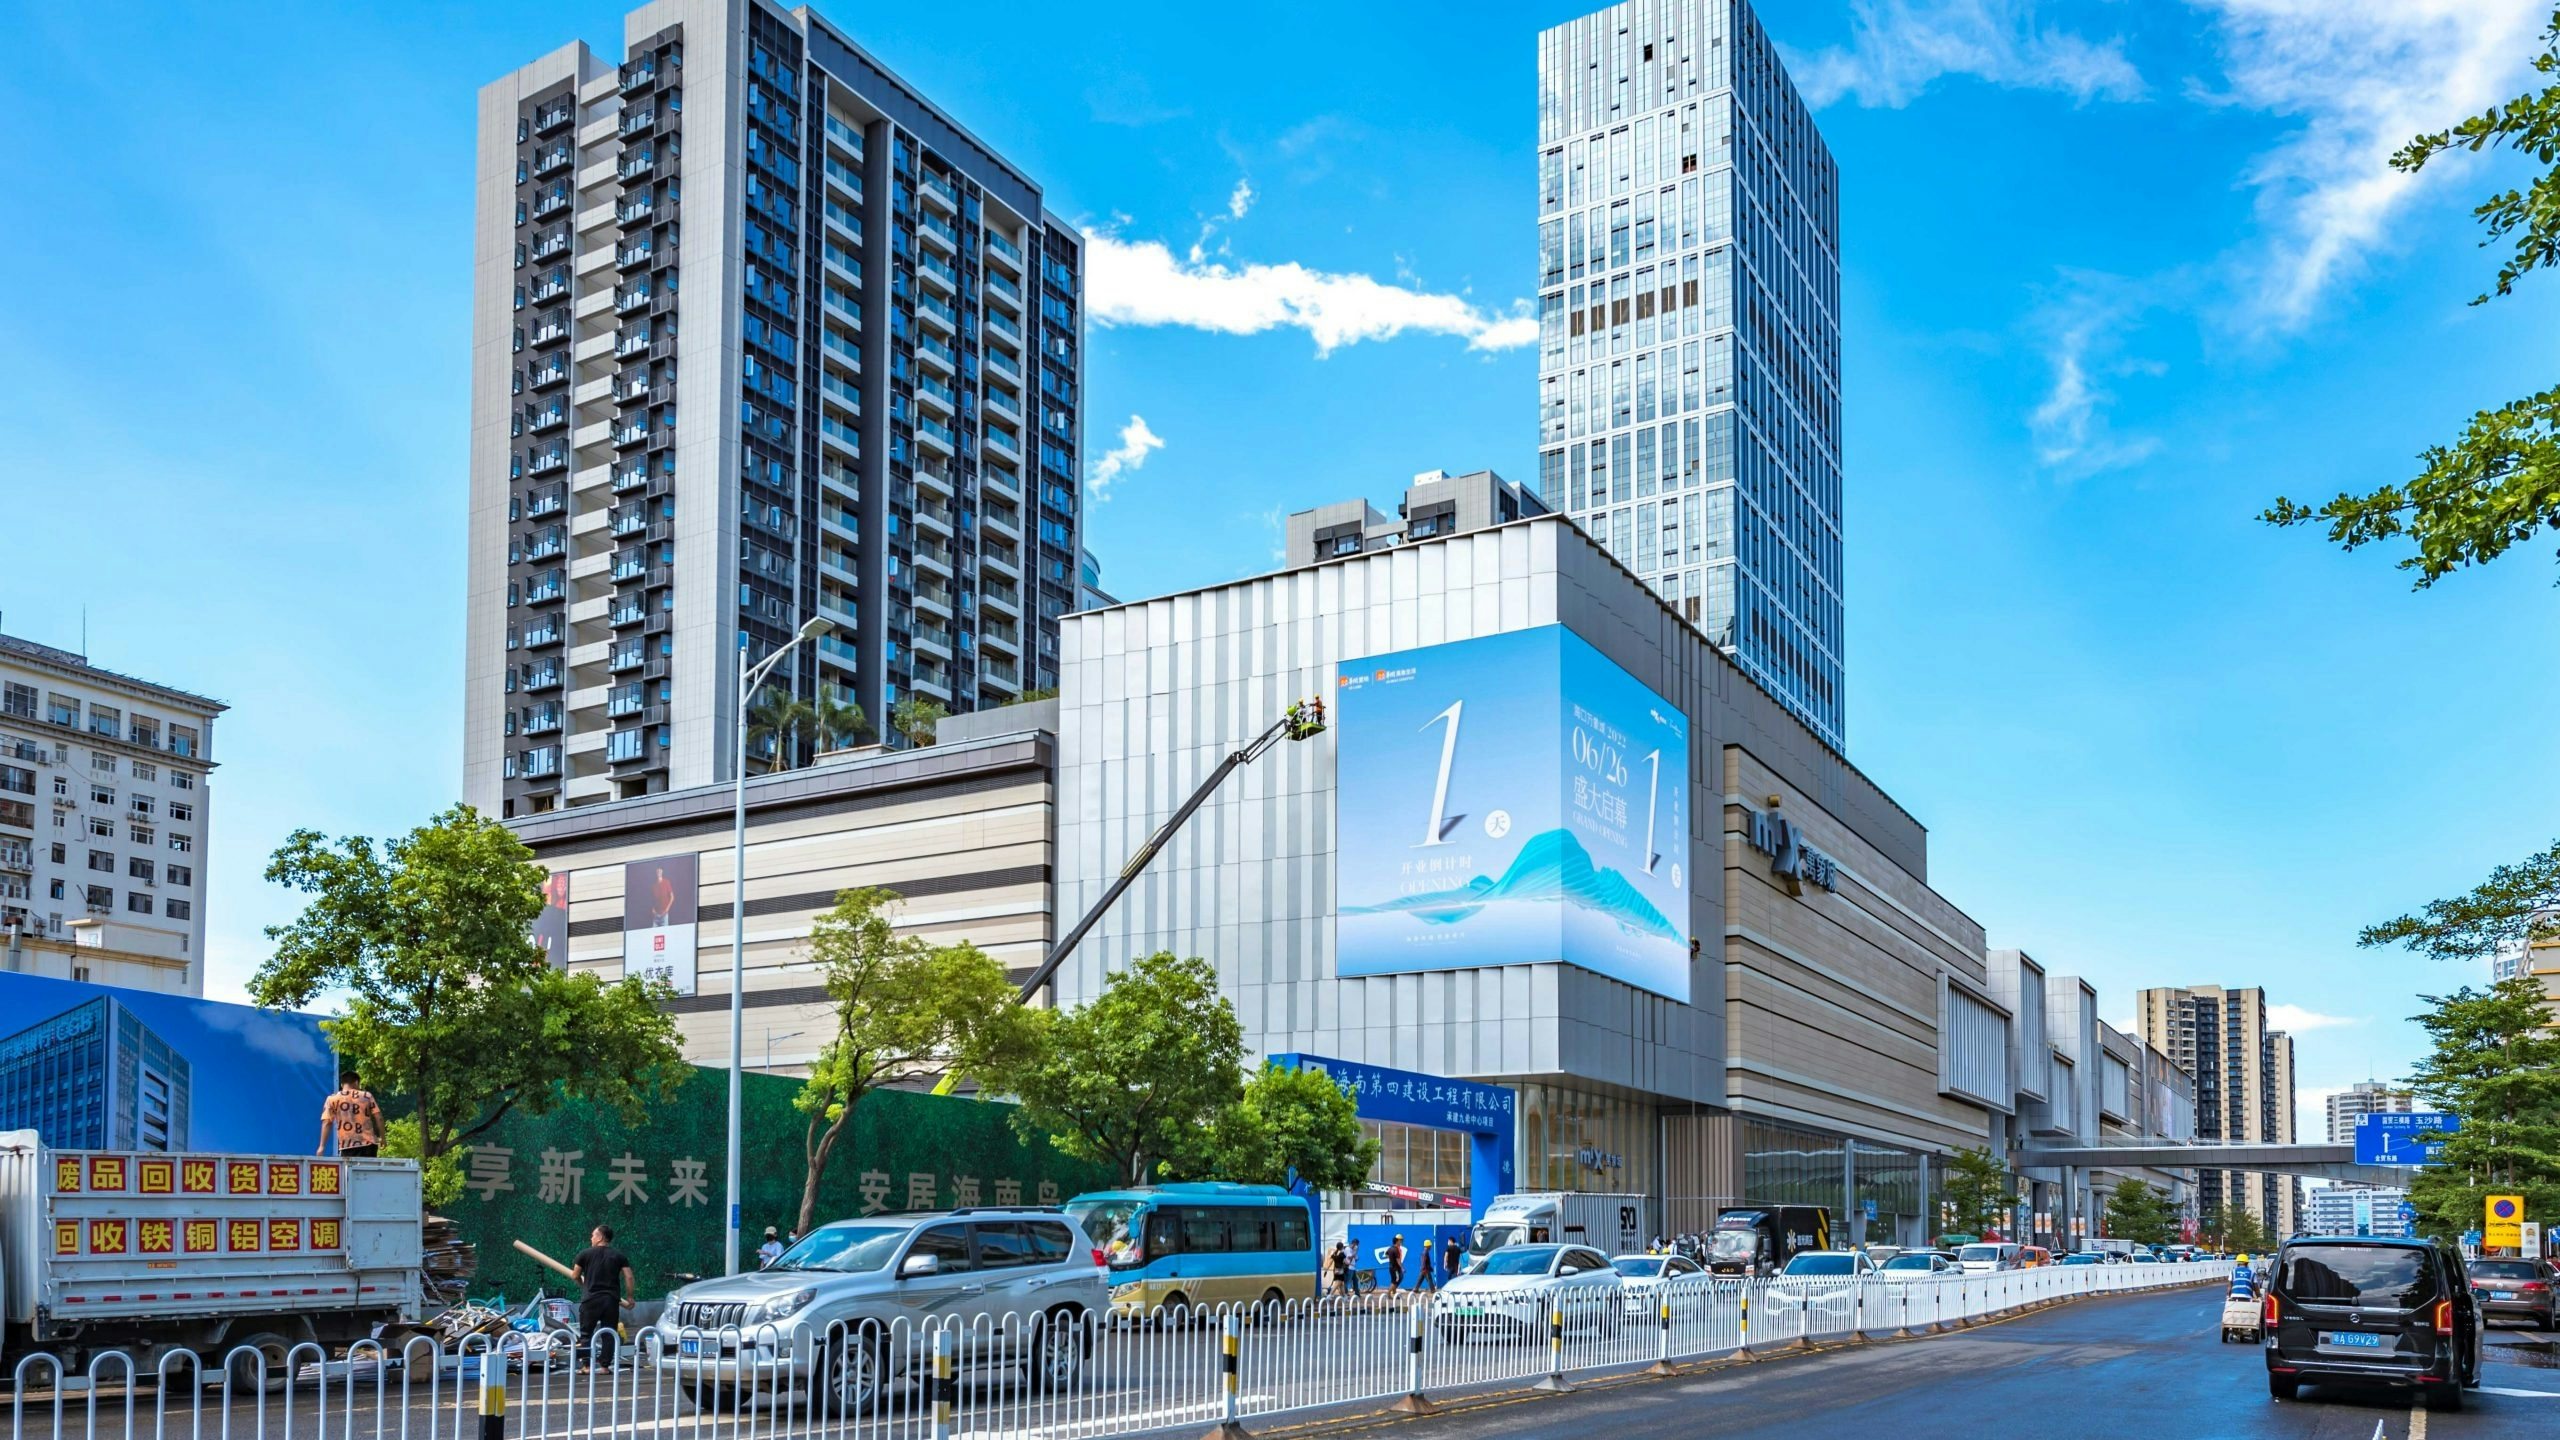 CR Land opened a Mixc mall in Hainan in 2022. Photo: Shutterstock